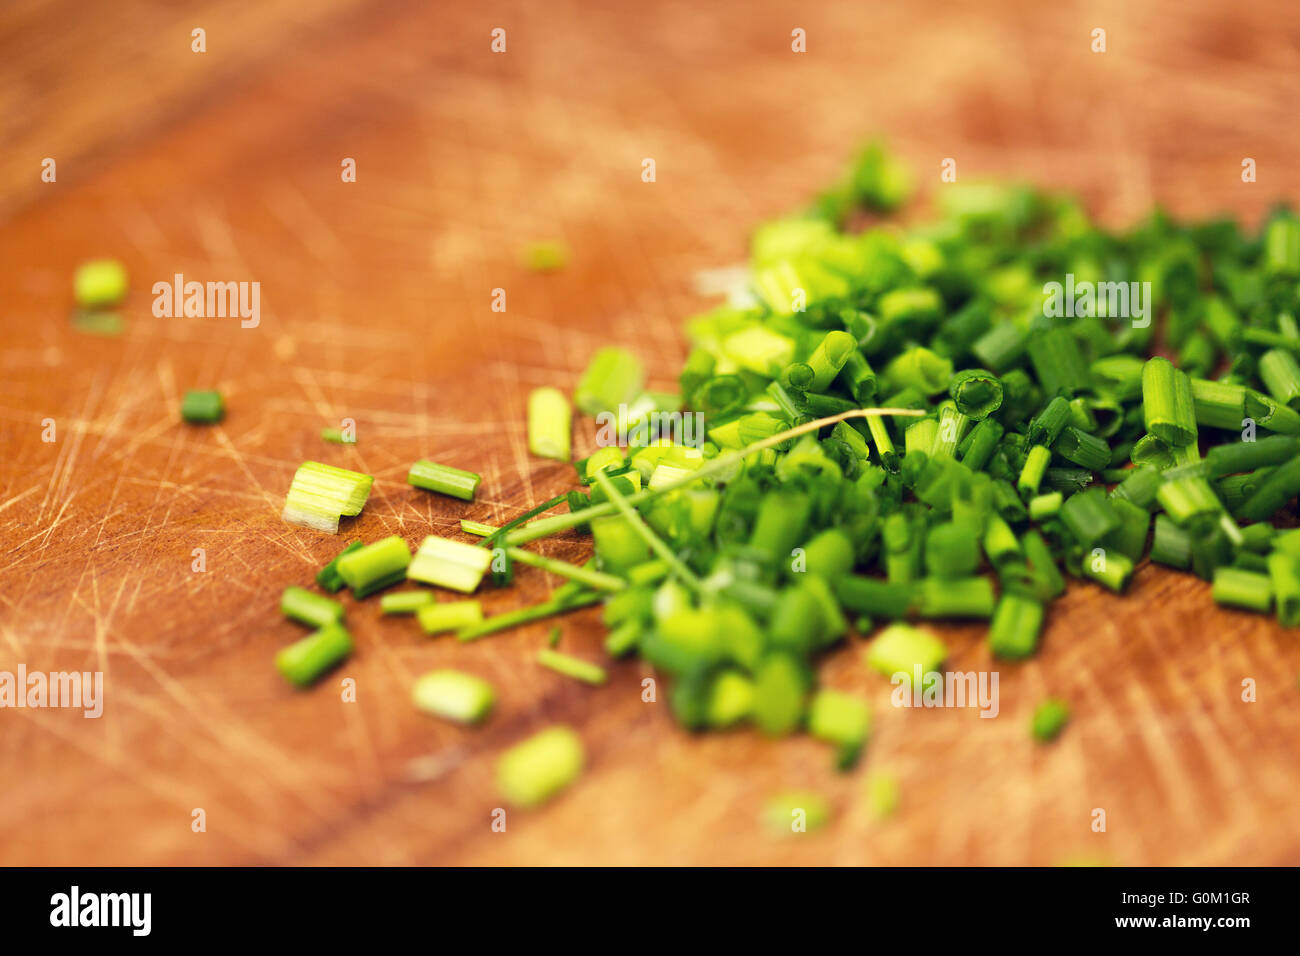 Chopped Green Onions On White Stock Photo, Picture and Royalty Free Image.  Image 13972236.